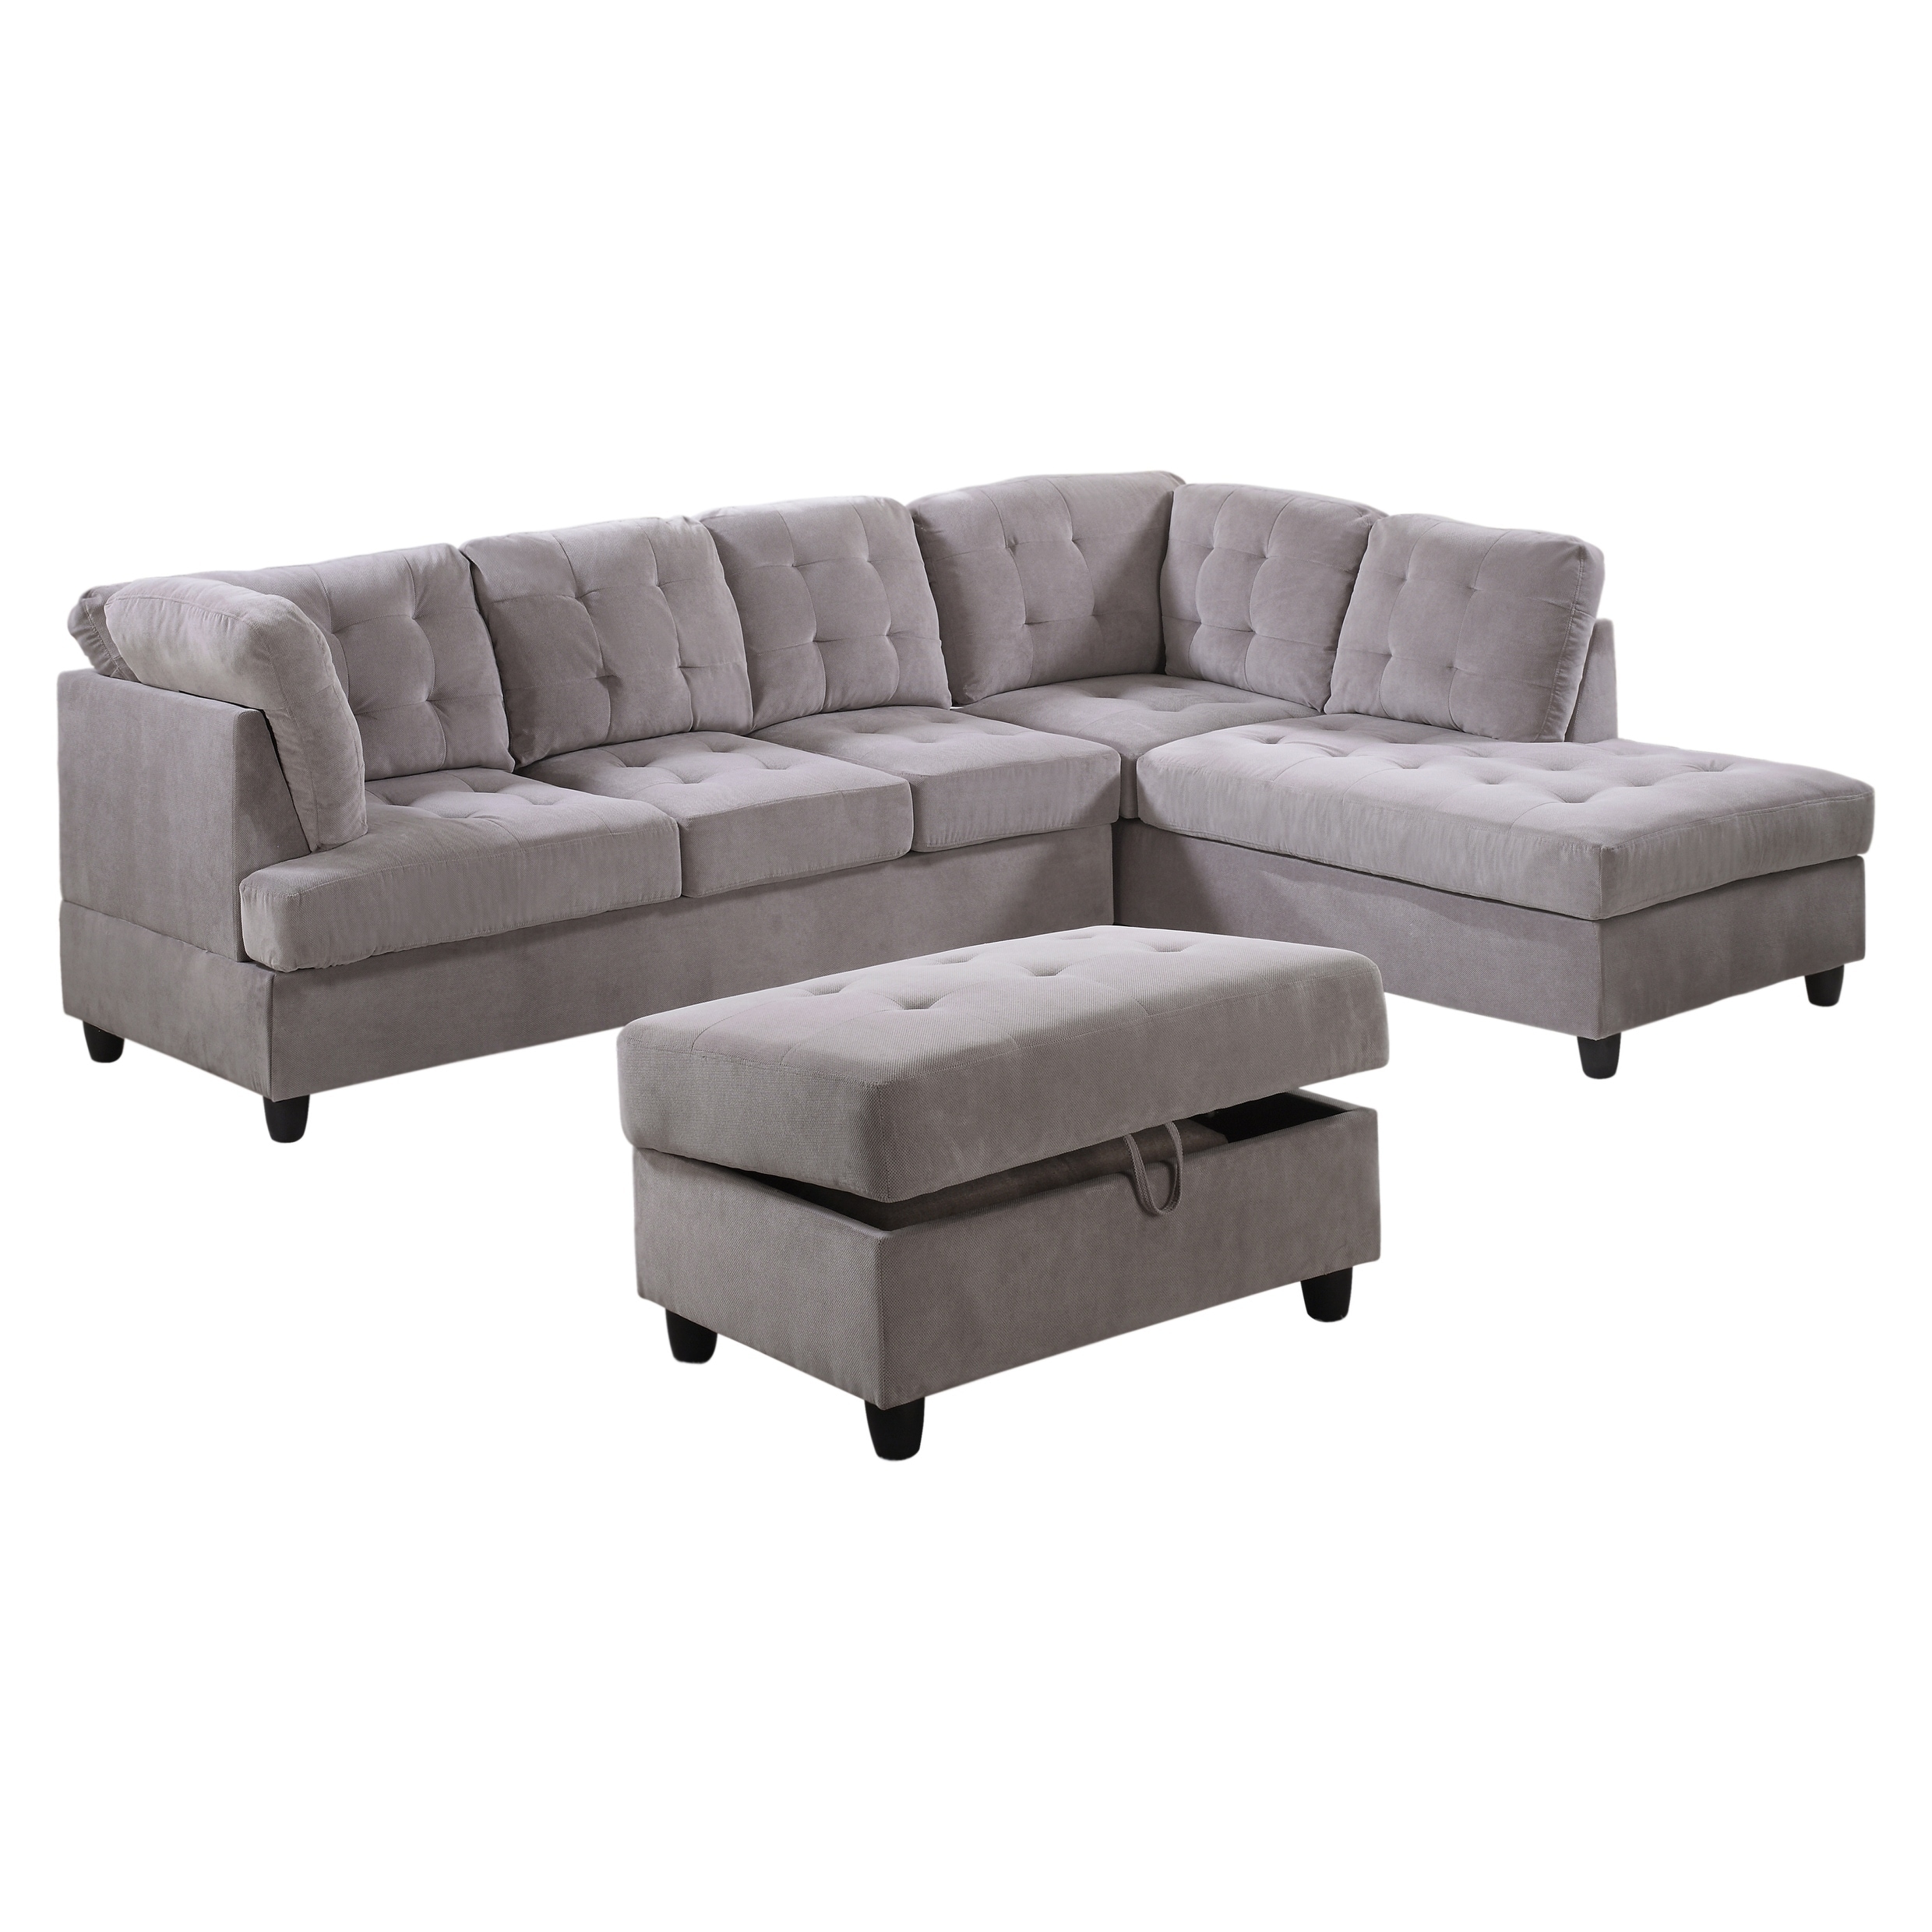 Shop Aycp Furniture Corduroy Sectional Sofa With Storage Ottoman